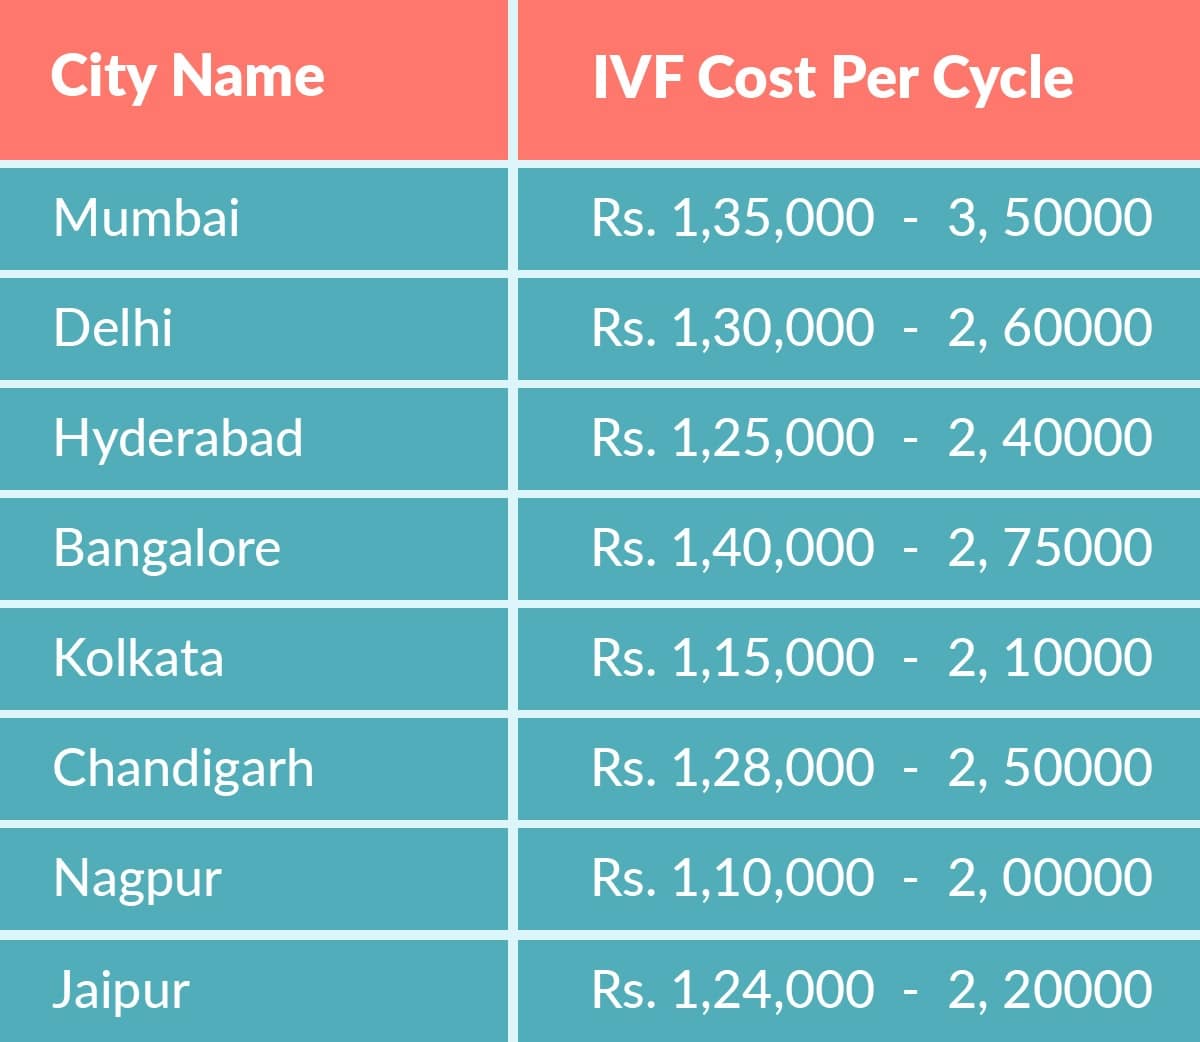 ivf cost in india - IVF Cost in India